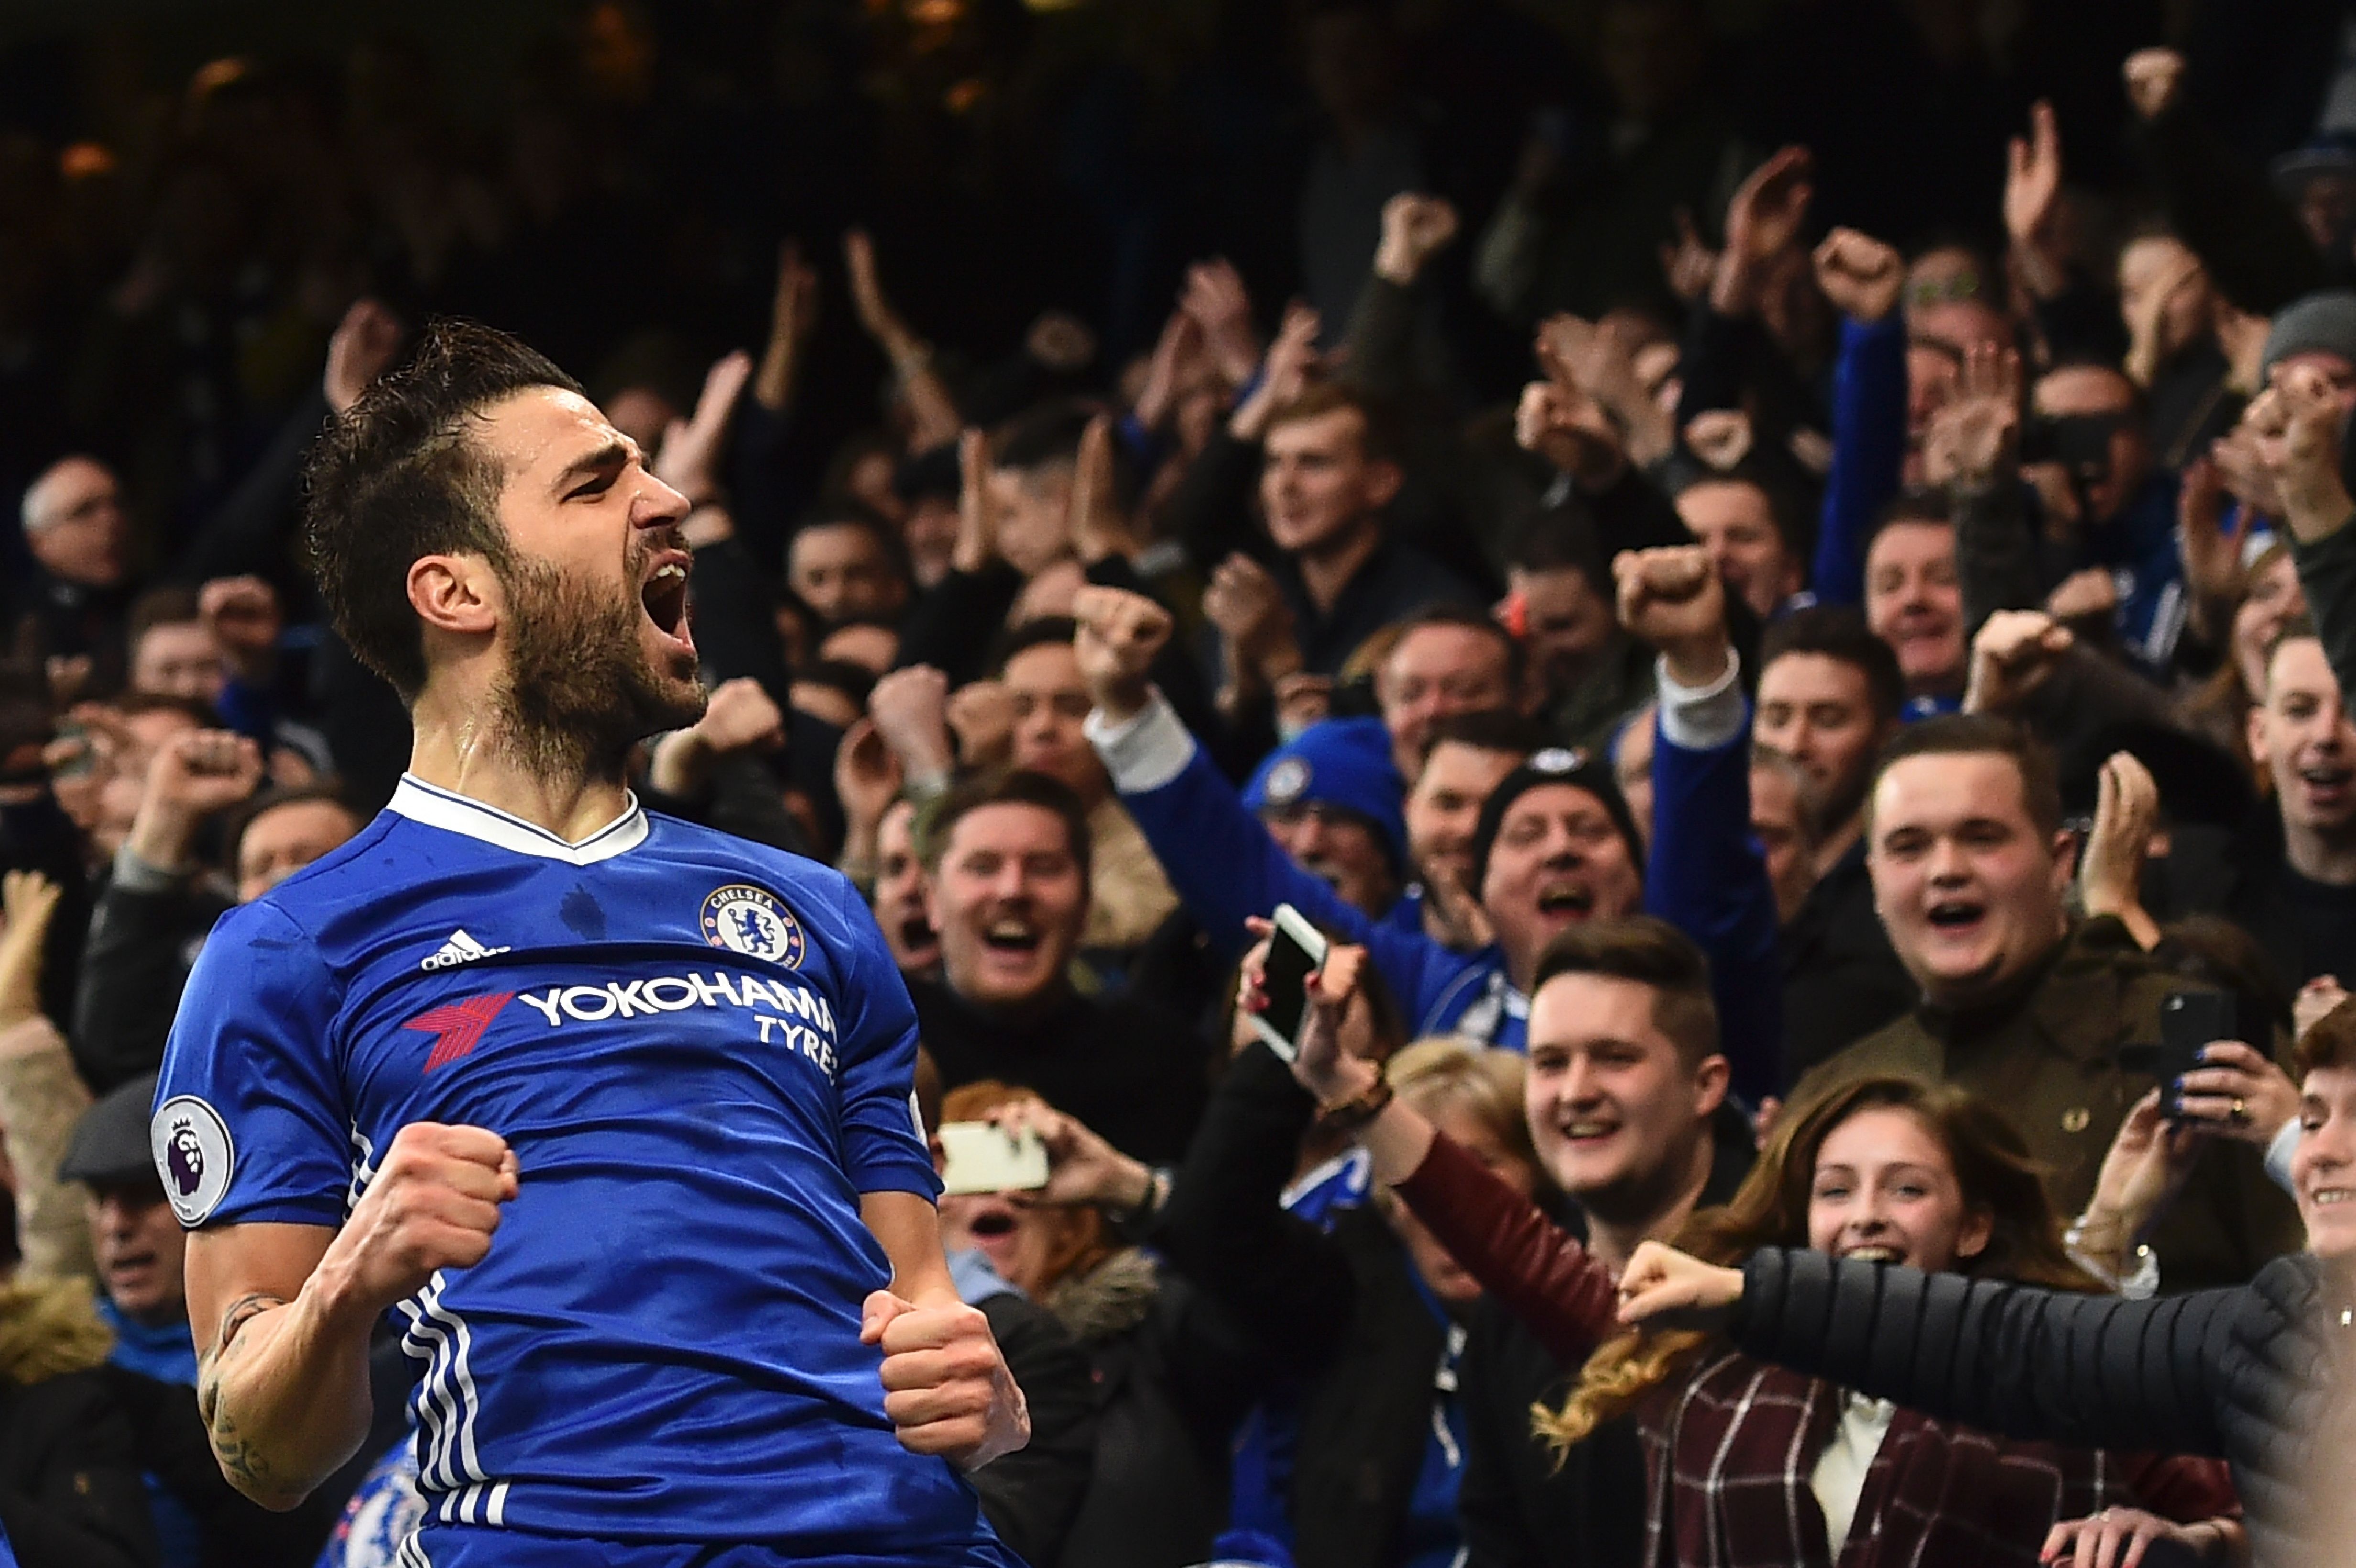 TOPSHOT - Chelsea's Spanish midfielder Cesc Fabregas celebrates scoring the opening goal during the English Premier League football match between Chelsea and Swansea at Stamford Bridge in London on February 25, 2017. / AFP / Glyn KIRK / RESTRICTED TO EDITORIAL USE. No use with unauthorized audio, video, data, fixture lists, club/league logos or 'live' services. Online in-match use limited to 75 images, no video emulation. No use in betting, games or single club/league/player publications.  /         (Photo credit should read GLYN KIRK/AFP/Getty Images)